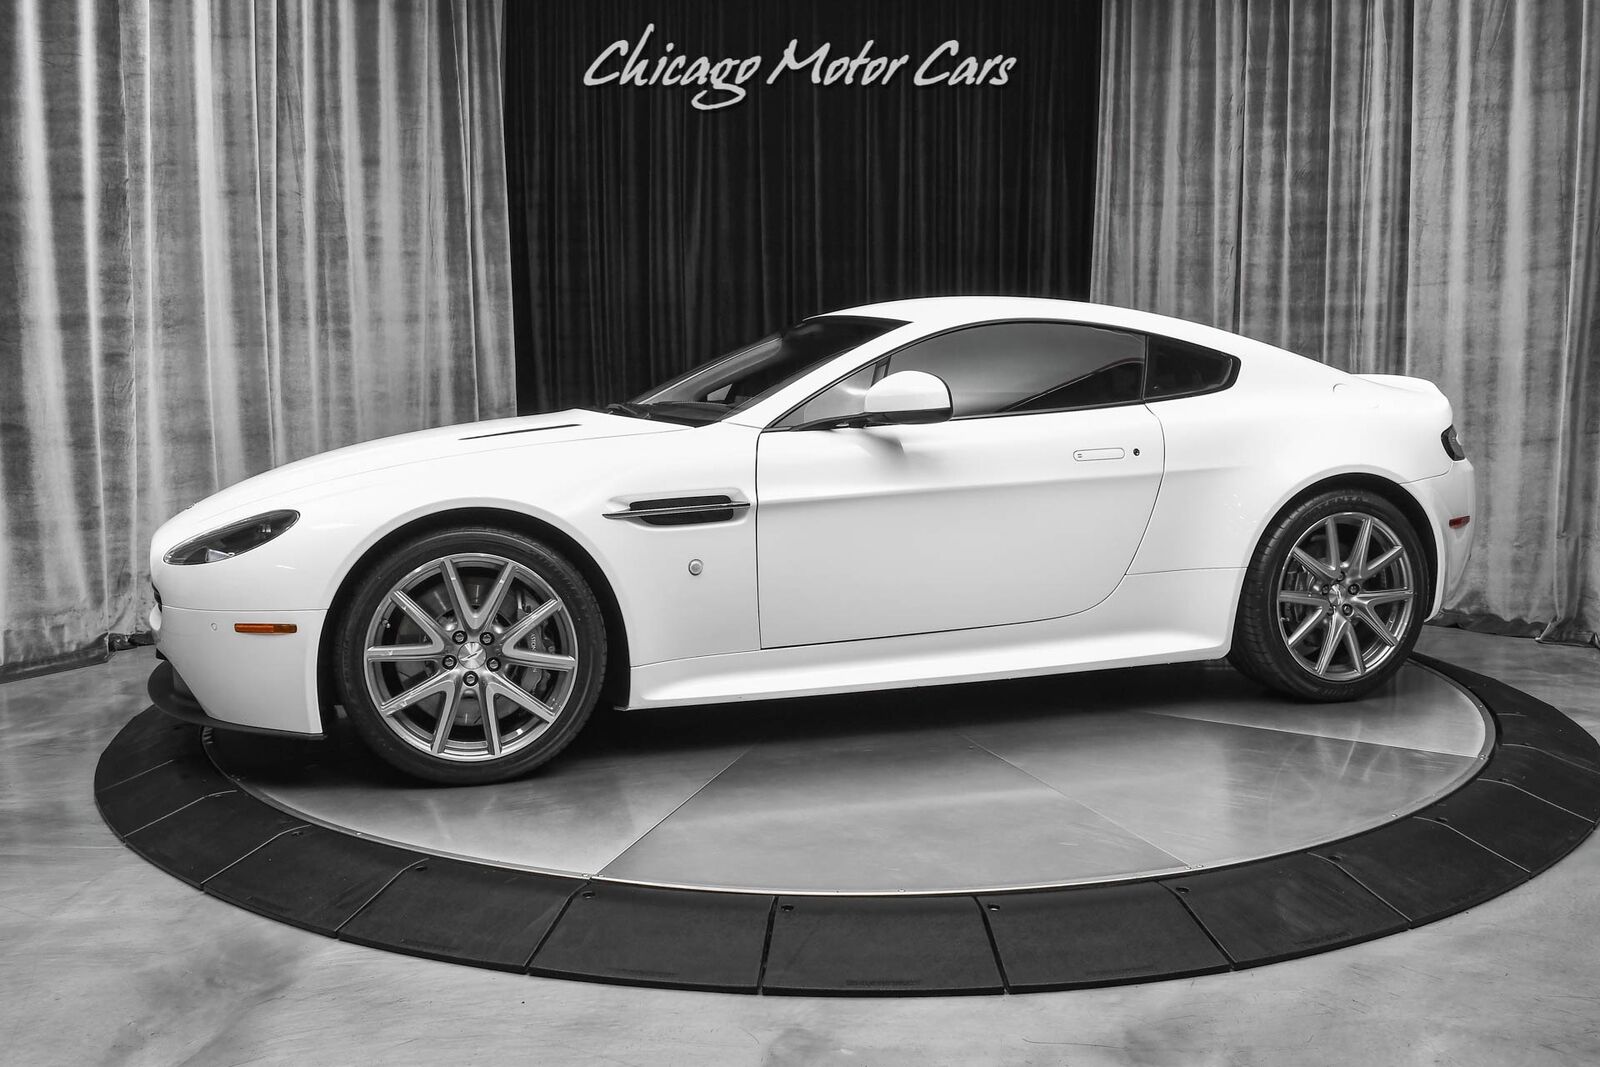 Max 67% OFF 1 year warranty 2015 Aston Martin Vantage GT Coupe Miles Speedway White 8K ONLY